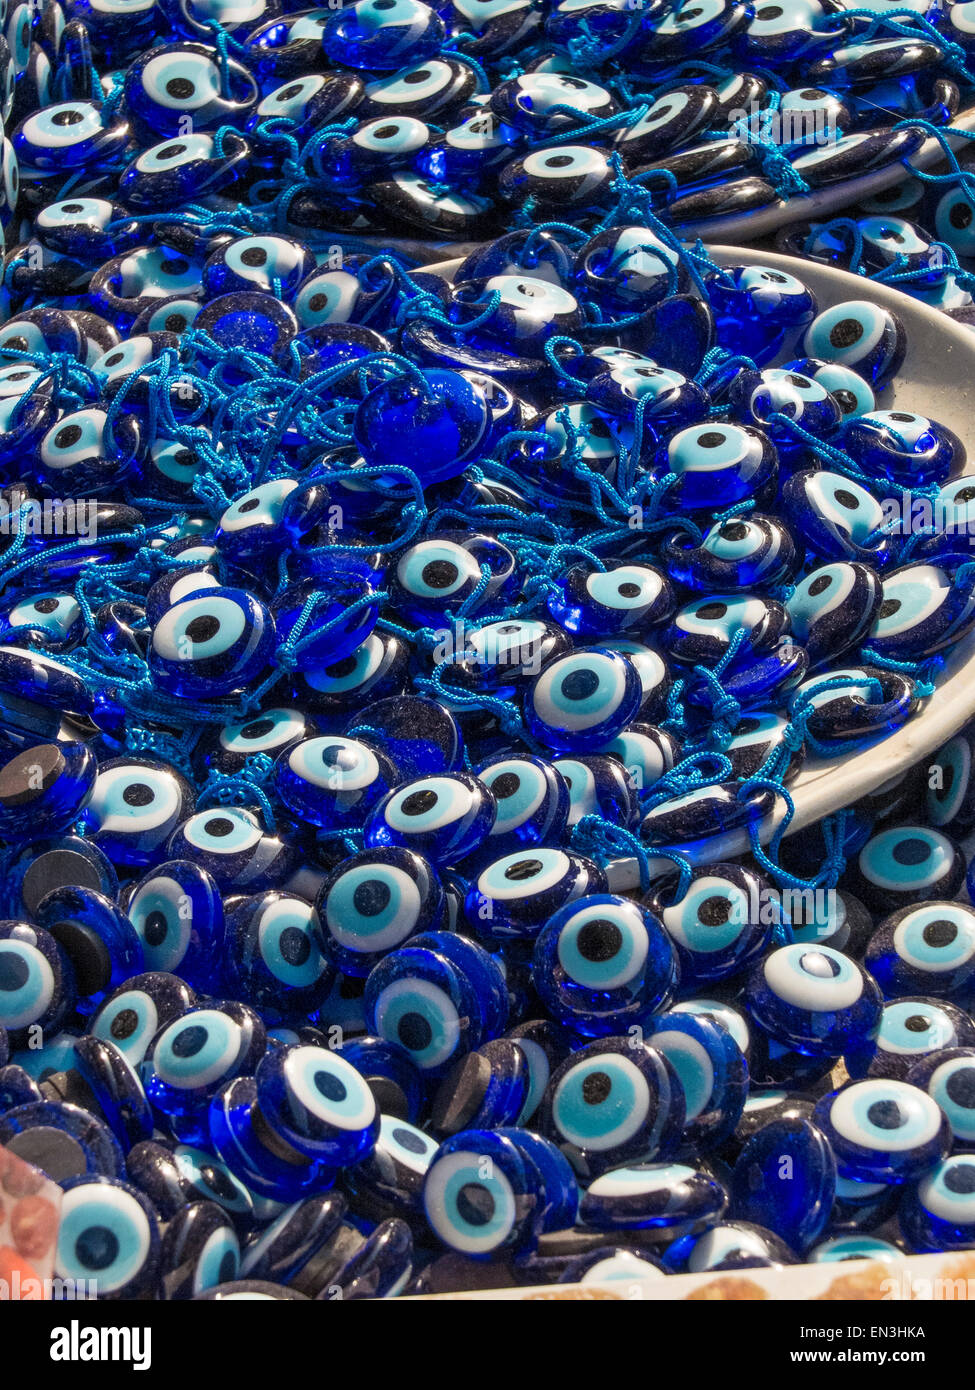 Nazar - Turkish eye-shaped amulet believed to protect against the evil eye Stock Photo